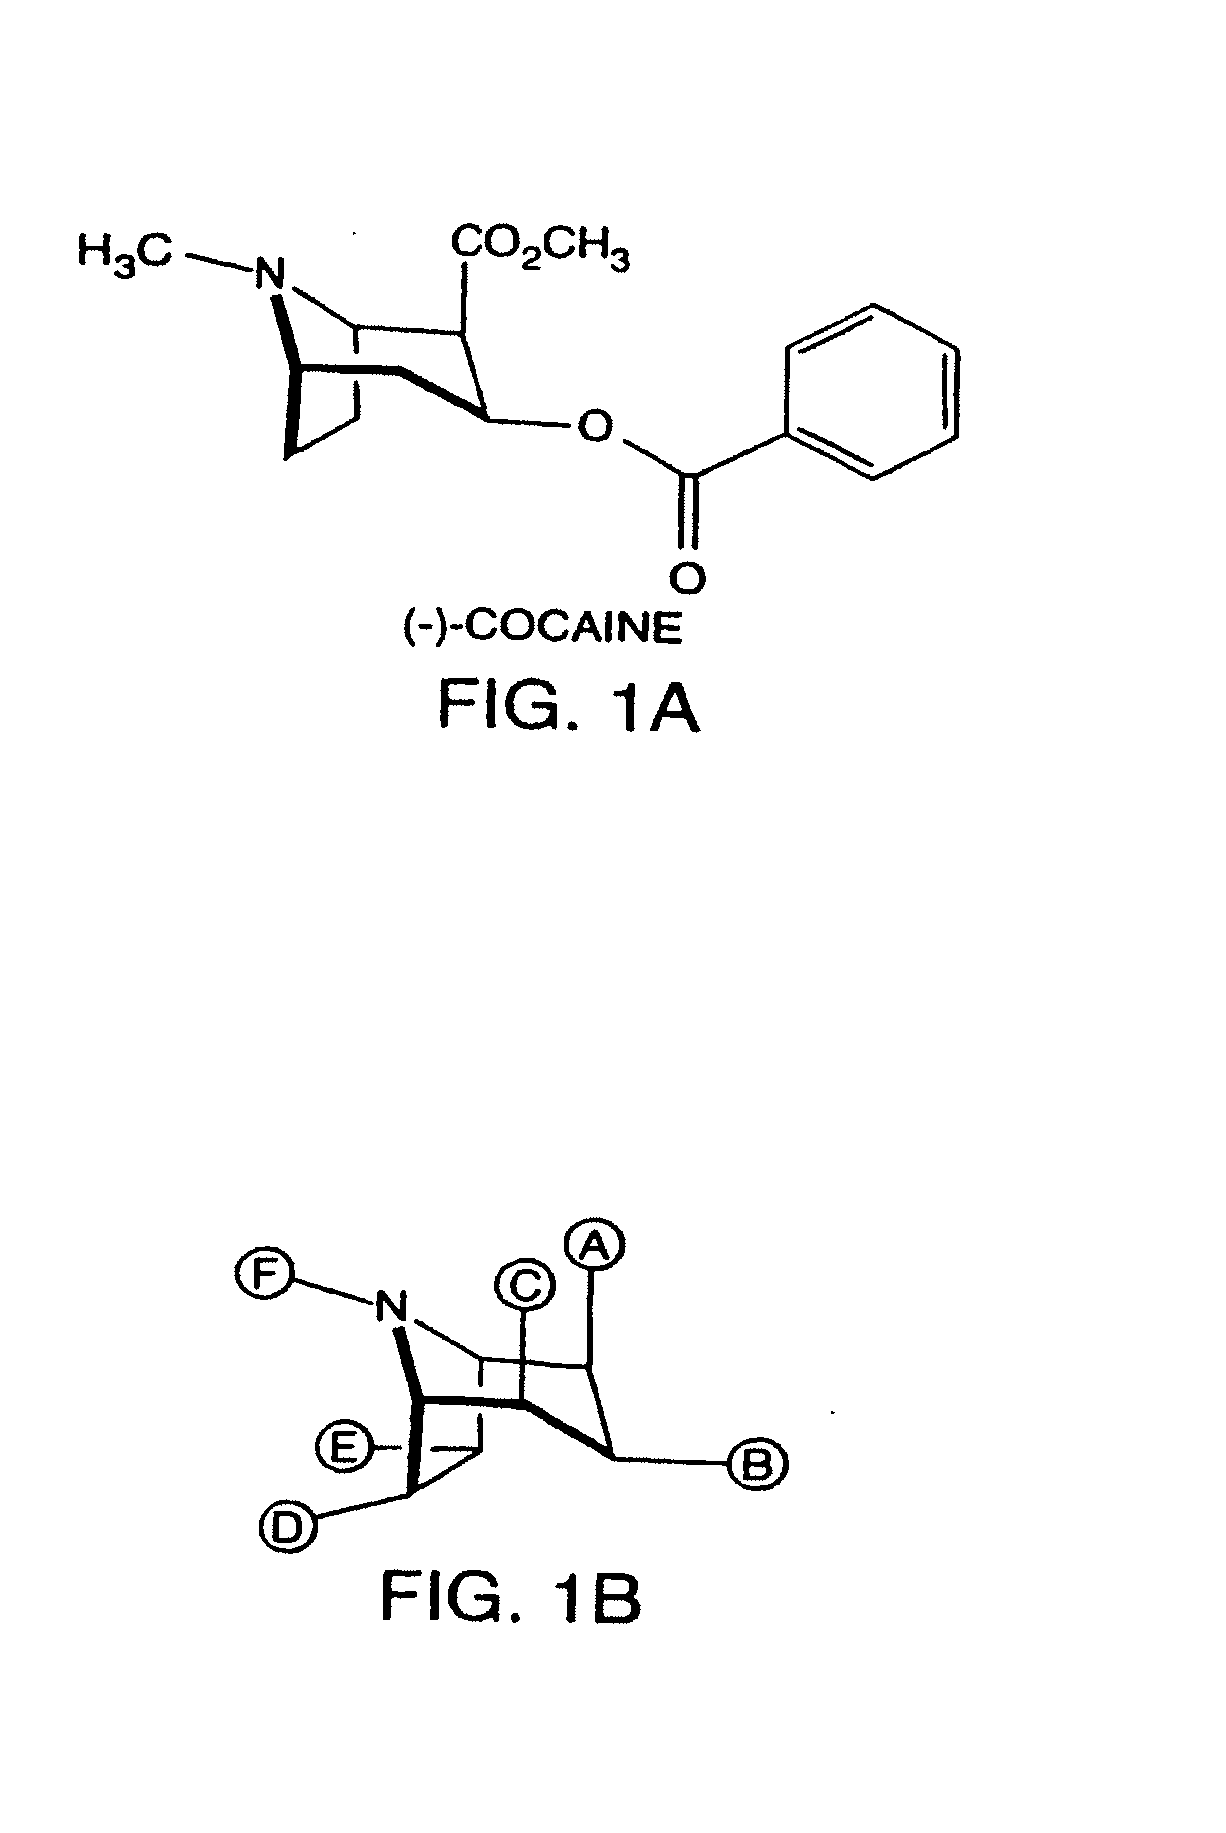 Hapten-carrier conjugates for use in drug abuse therapy and methods for preparation of same